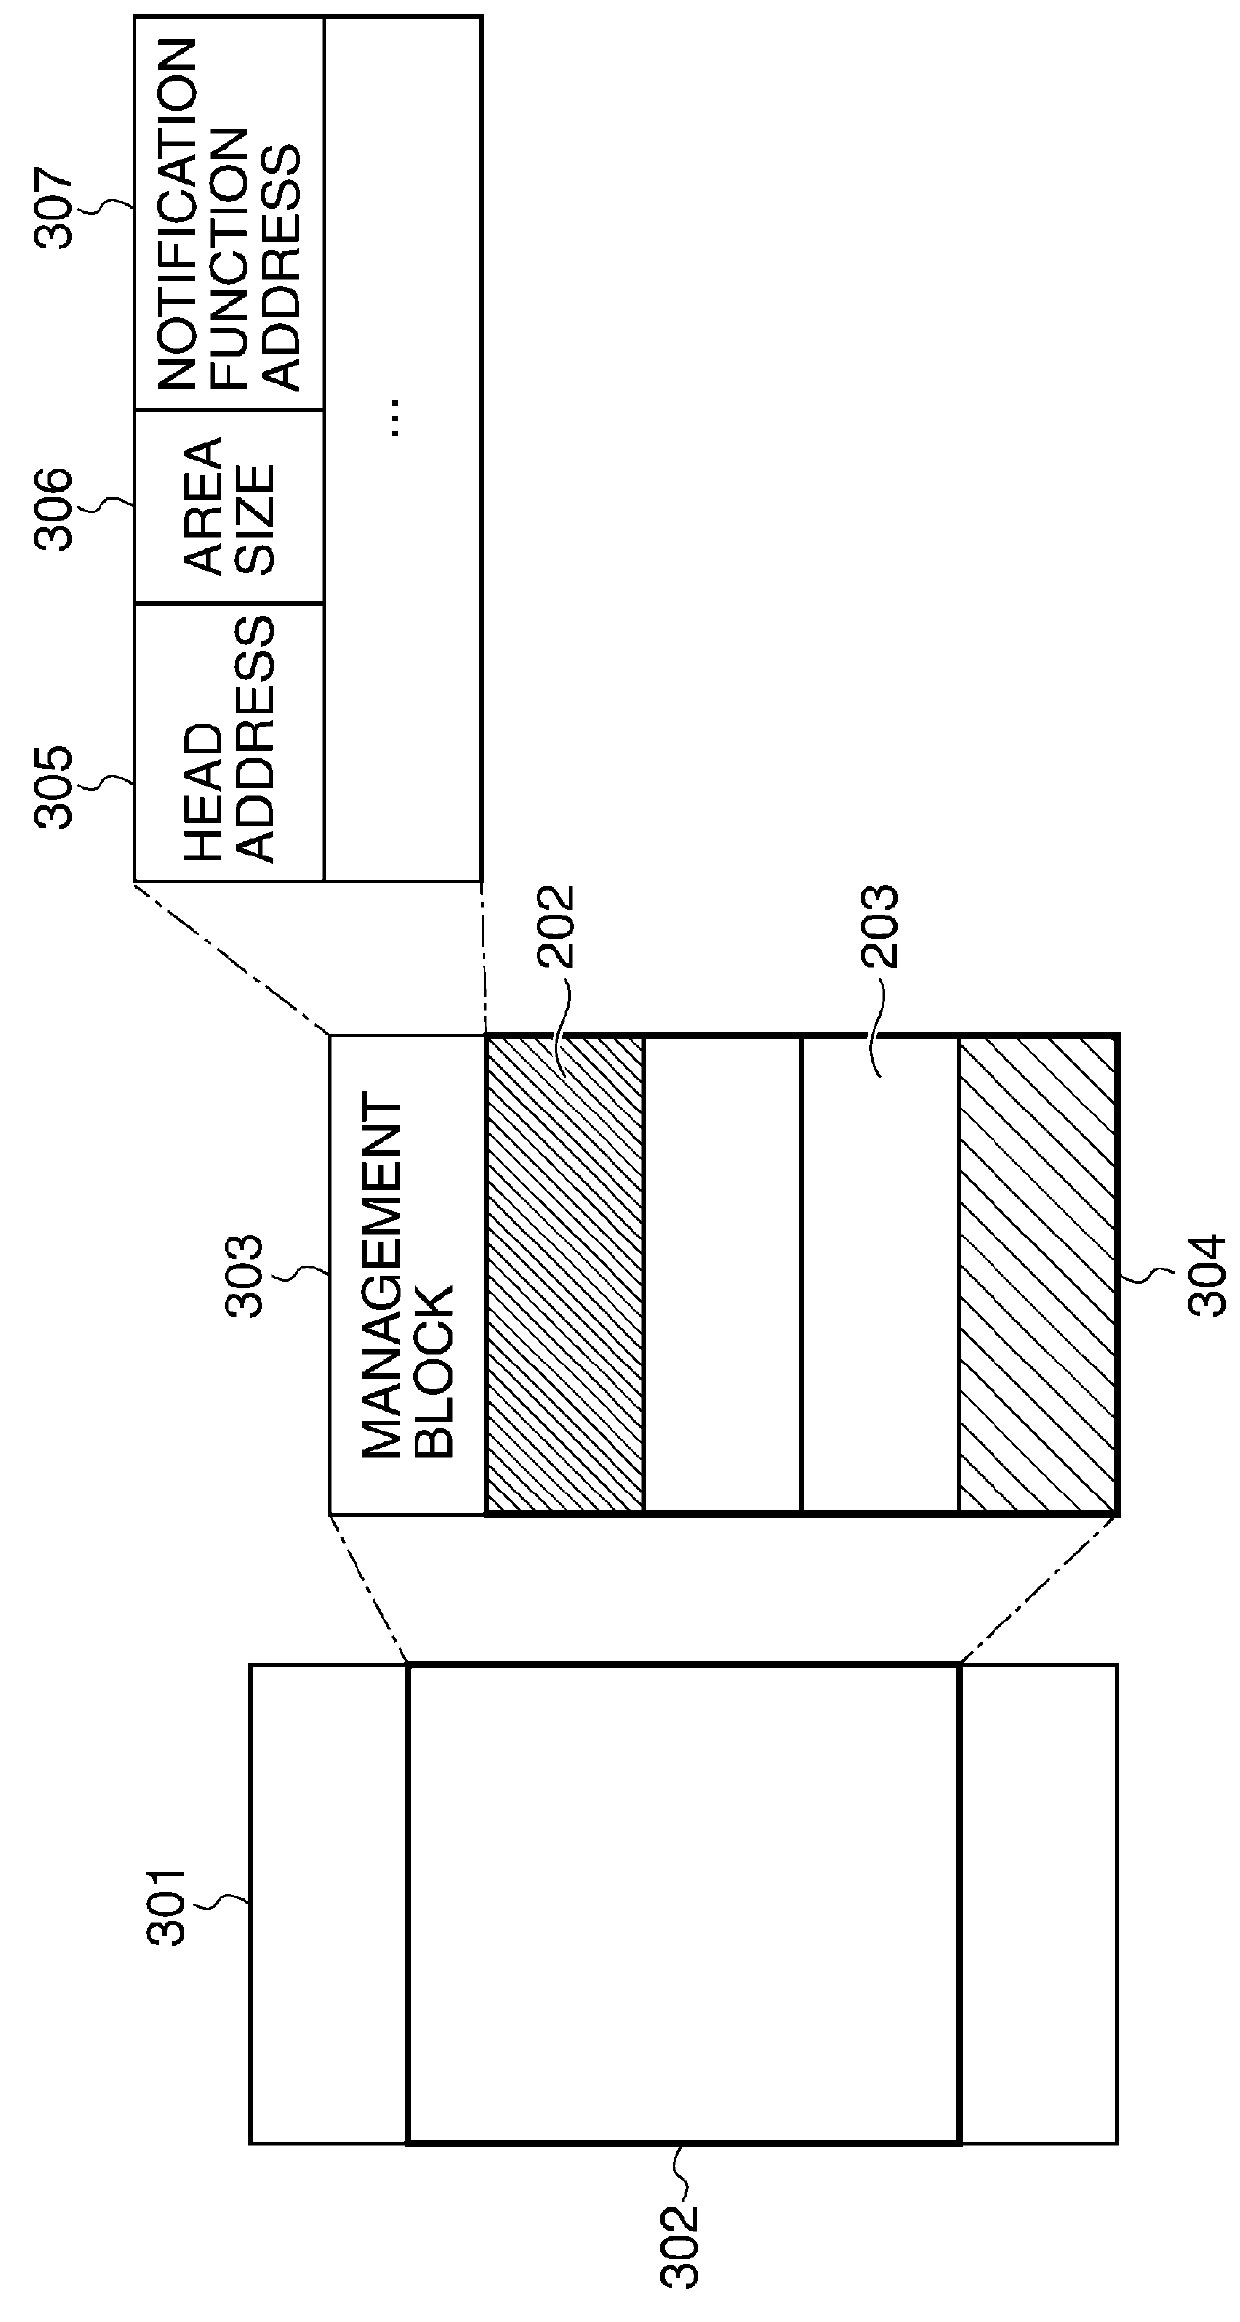 Information processing apparatus with hibernation function, control method therefor, and storage medium storing control program therefor